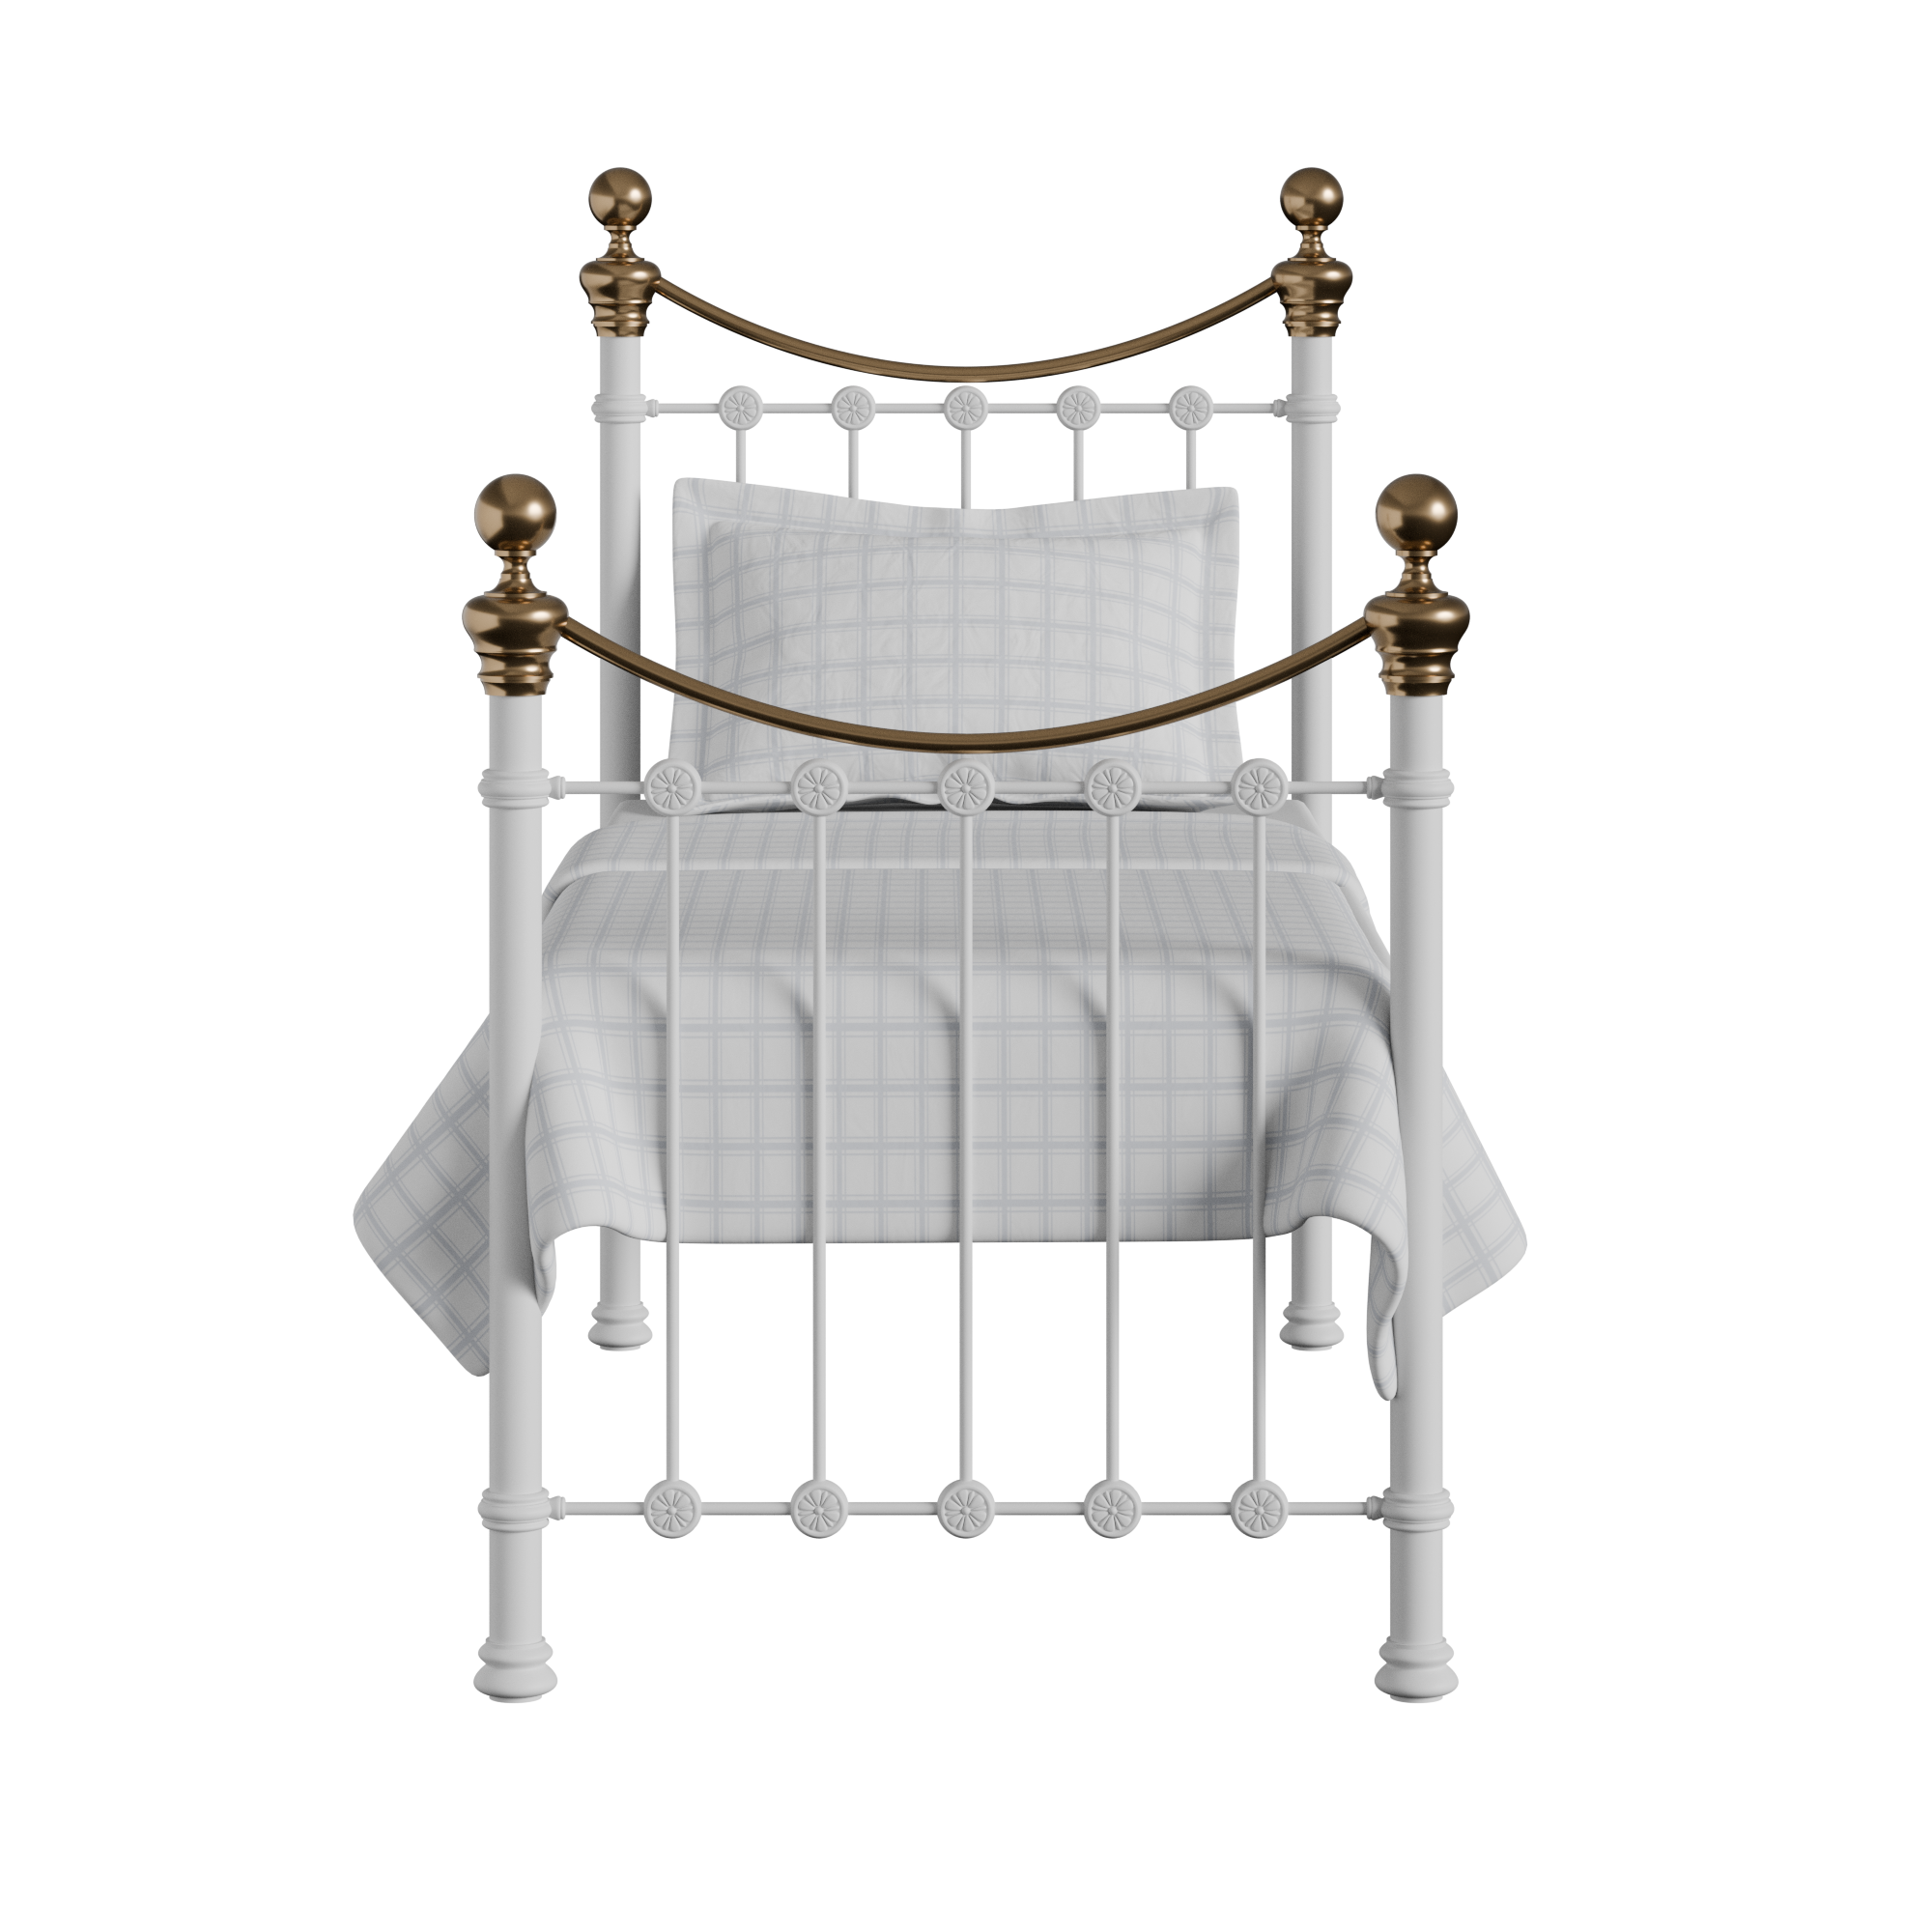 Selkirk iron/metal single bed in white